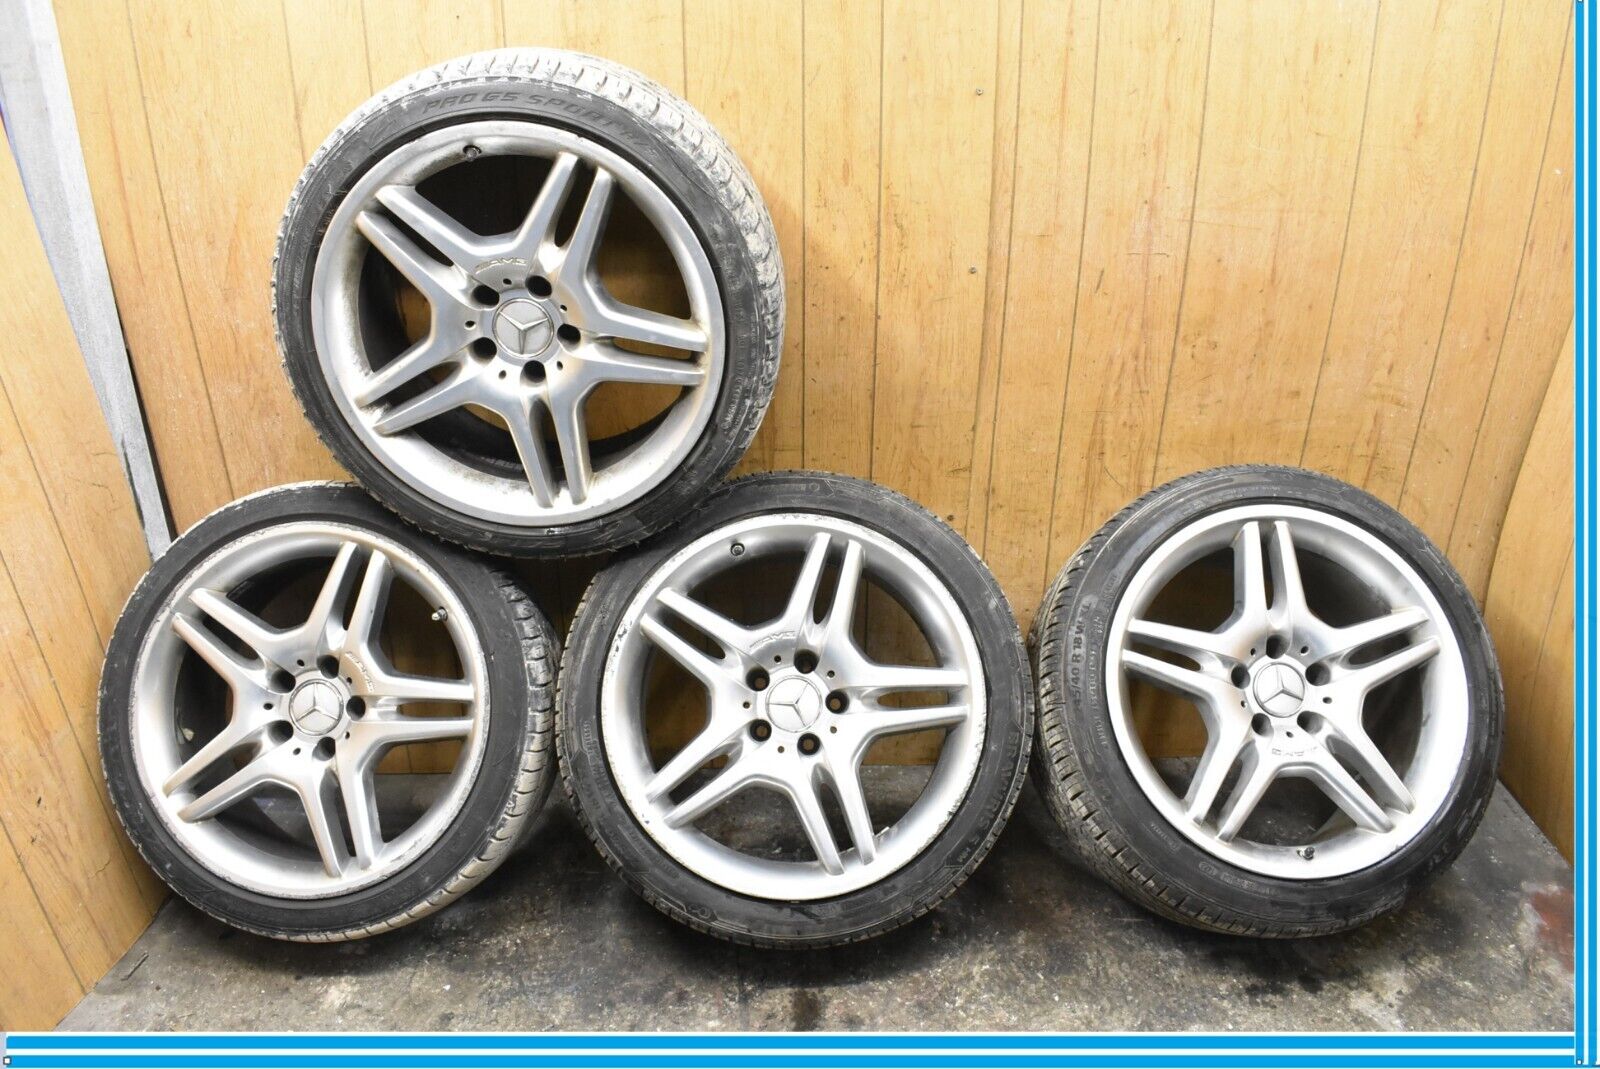 06-11 Mercedes W219 CLS55 CLS63 AMG Staggered Wheel Tire Rim Set Of 4 Pc OEM